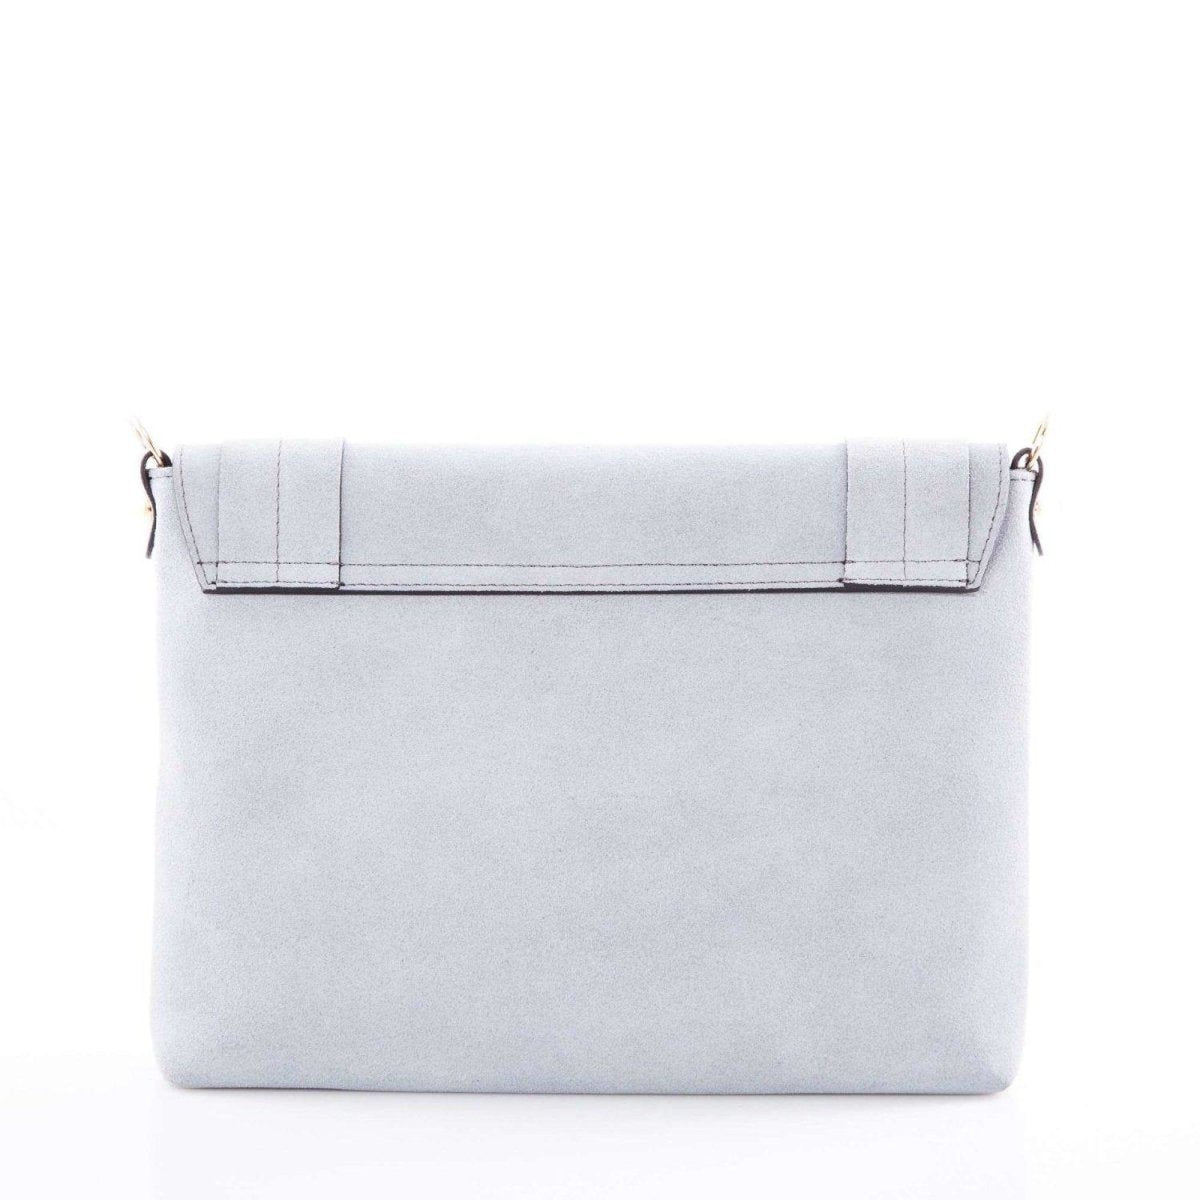 Suede Leather Cross Body / Clutch Bag - Ozzell London